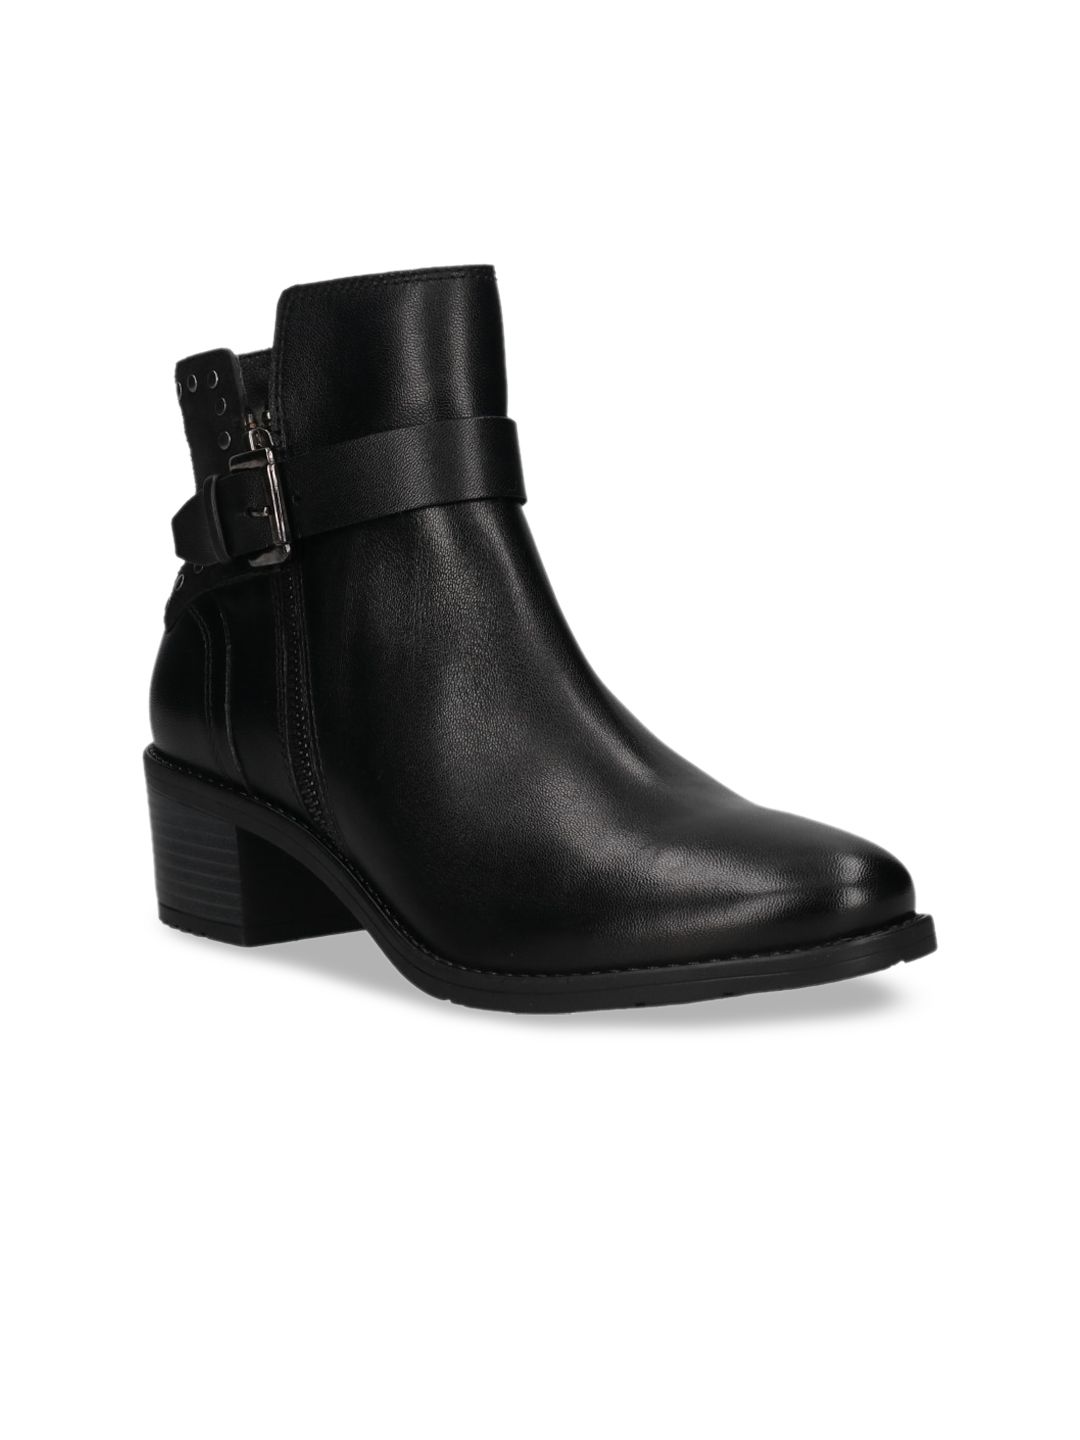 Bugatti Women Black Leather High-Top Block Heeled Boots with Buckles Price in India